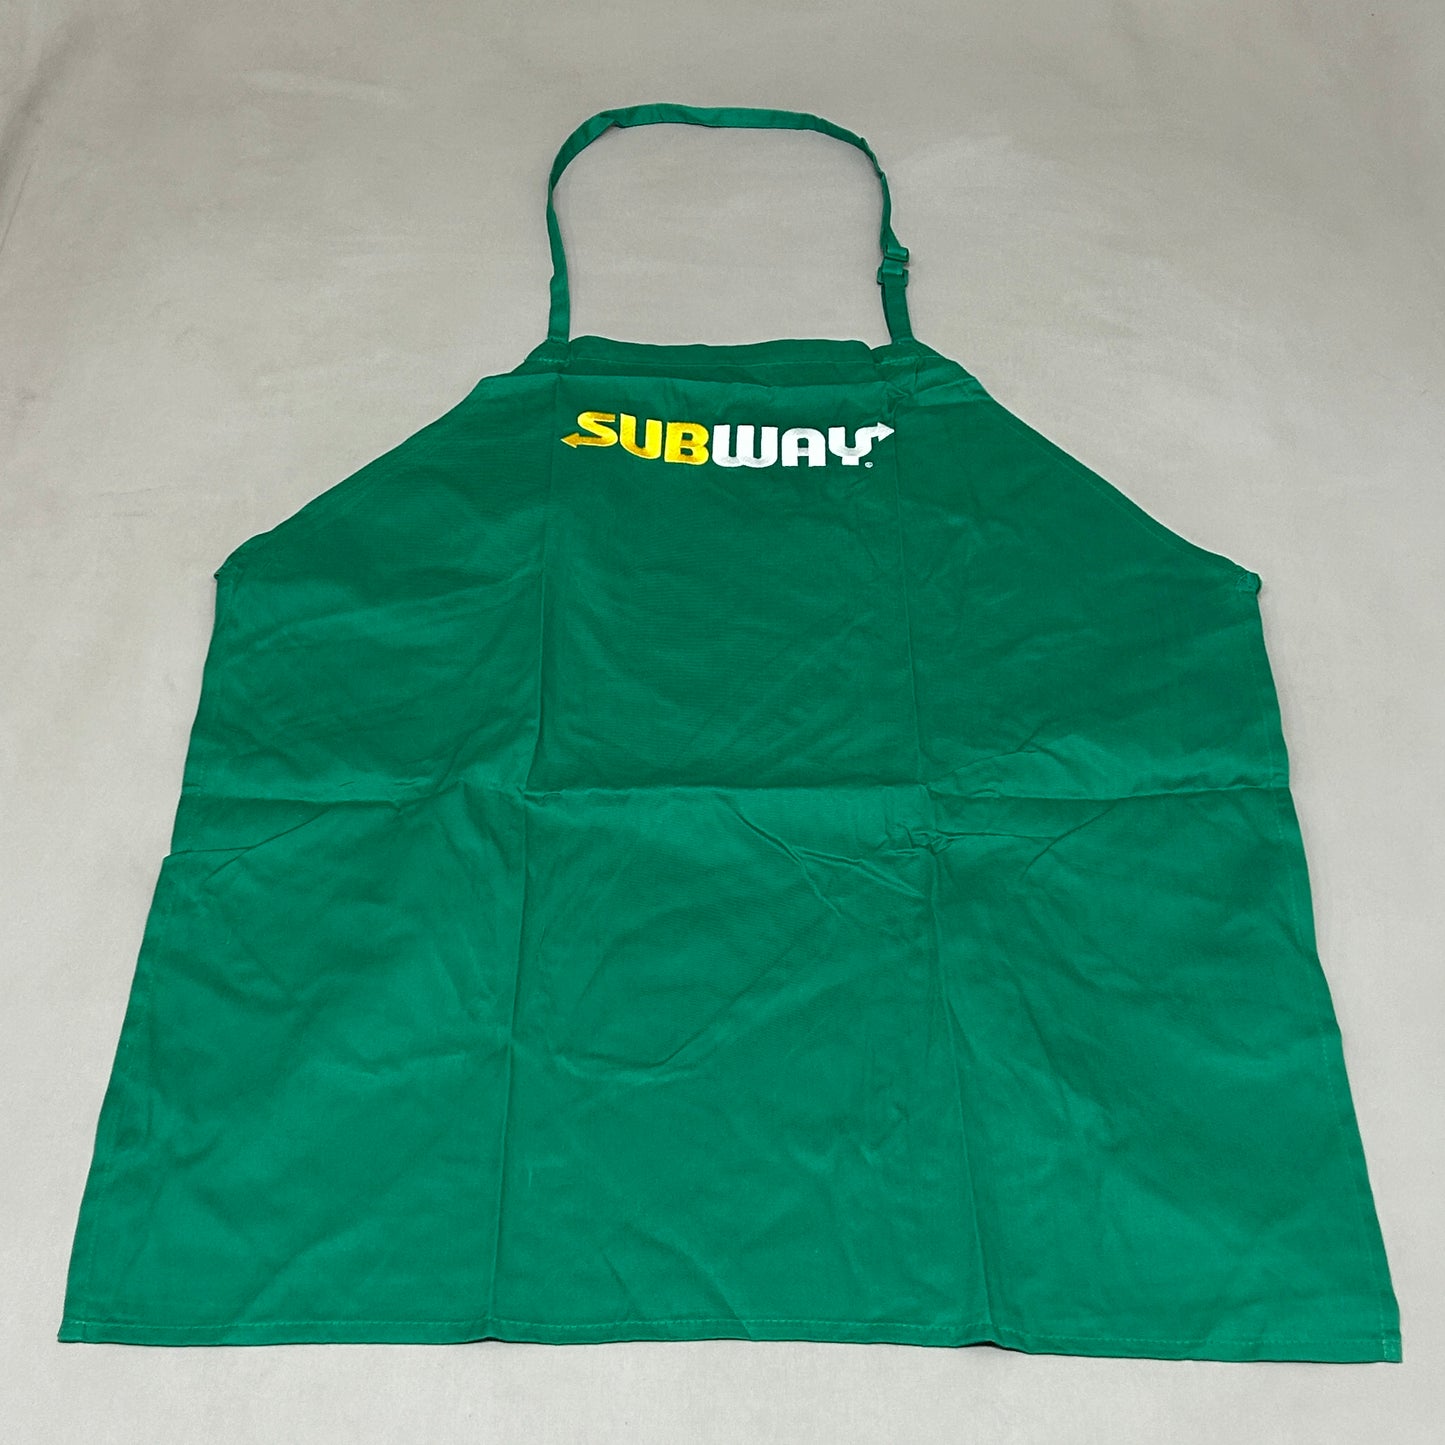 SUBWAY 3-Pack! Subway Full Size Aprons Green One Size (New)